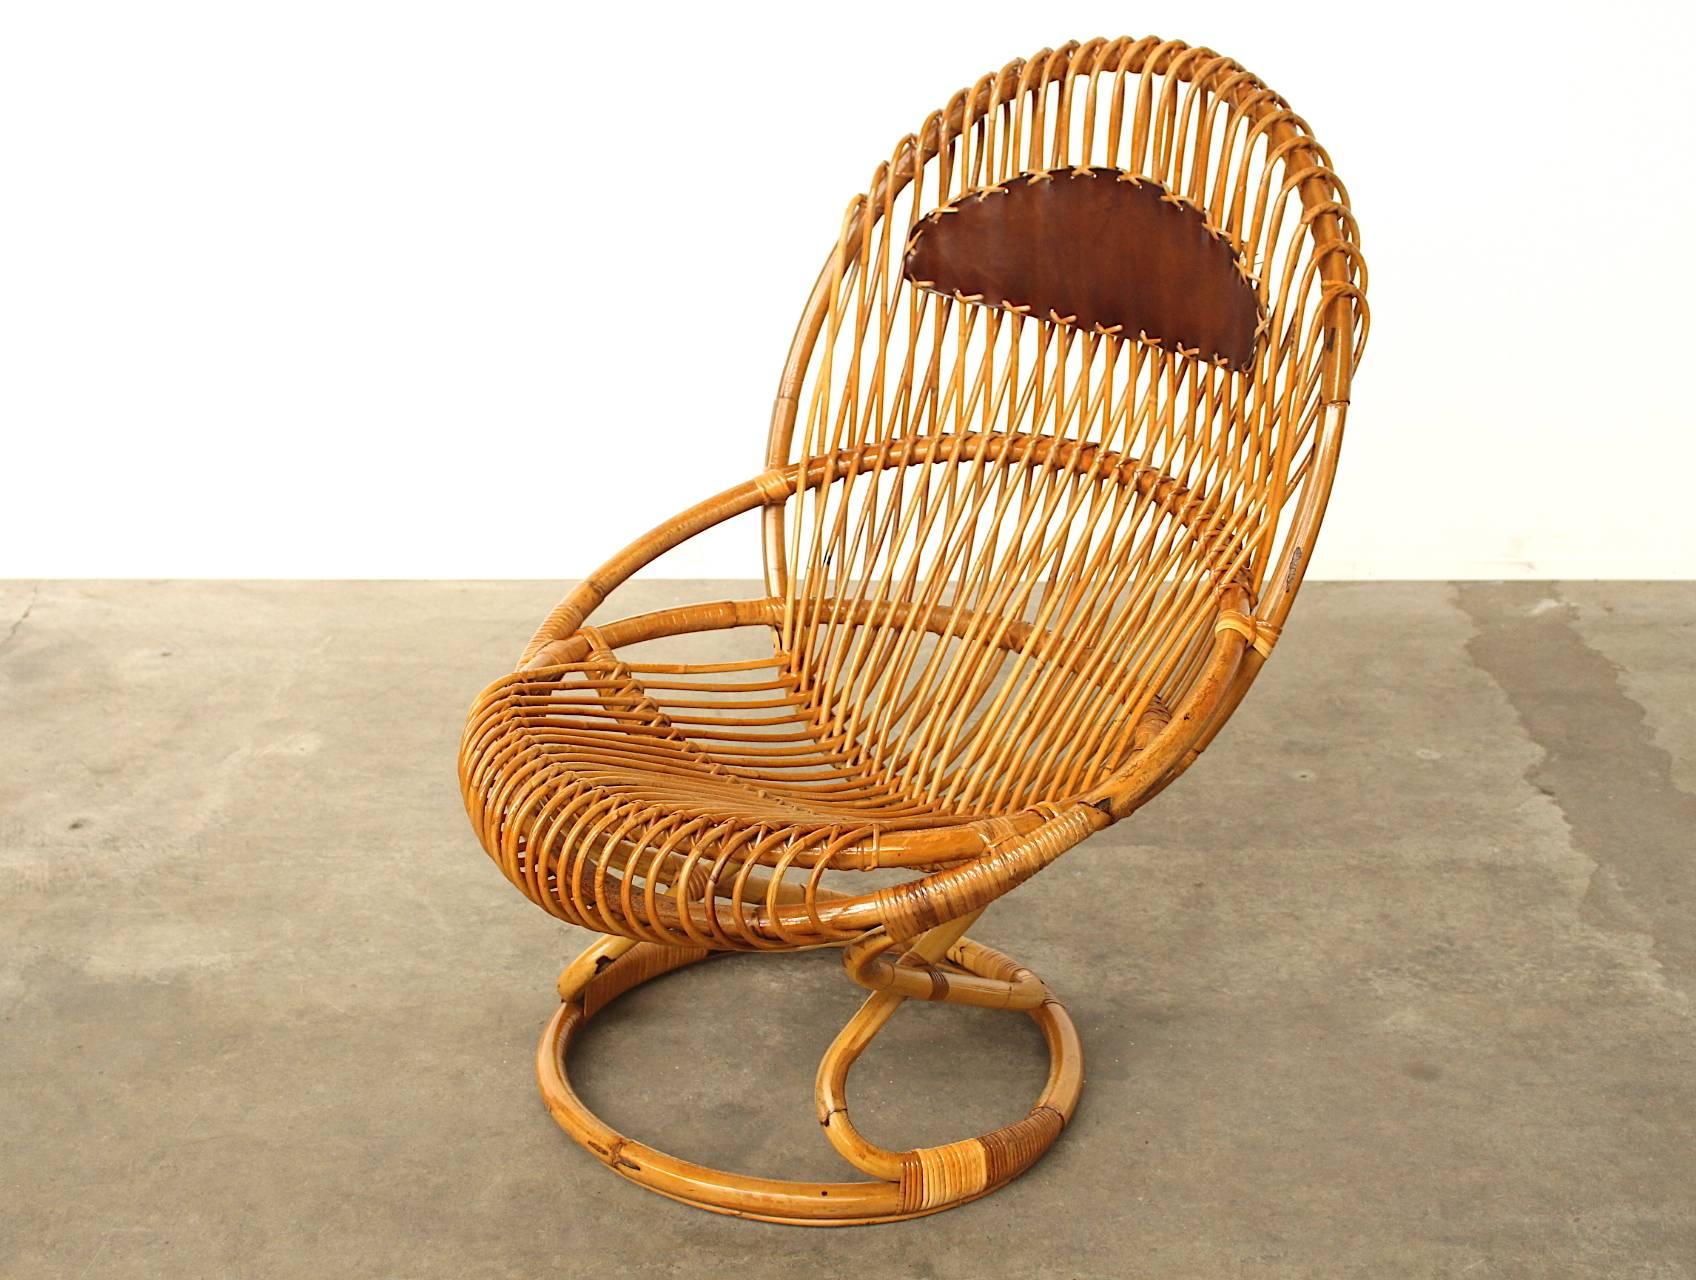 Extremely rare to find easy chair or armchair designed by Italian designer Giovanni Travasa for the design company Pierantonio Bonacina in the 1950s. The chair is beautifully master handcrafted with bent rattan strings and looks absolutely amazing